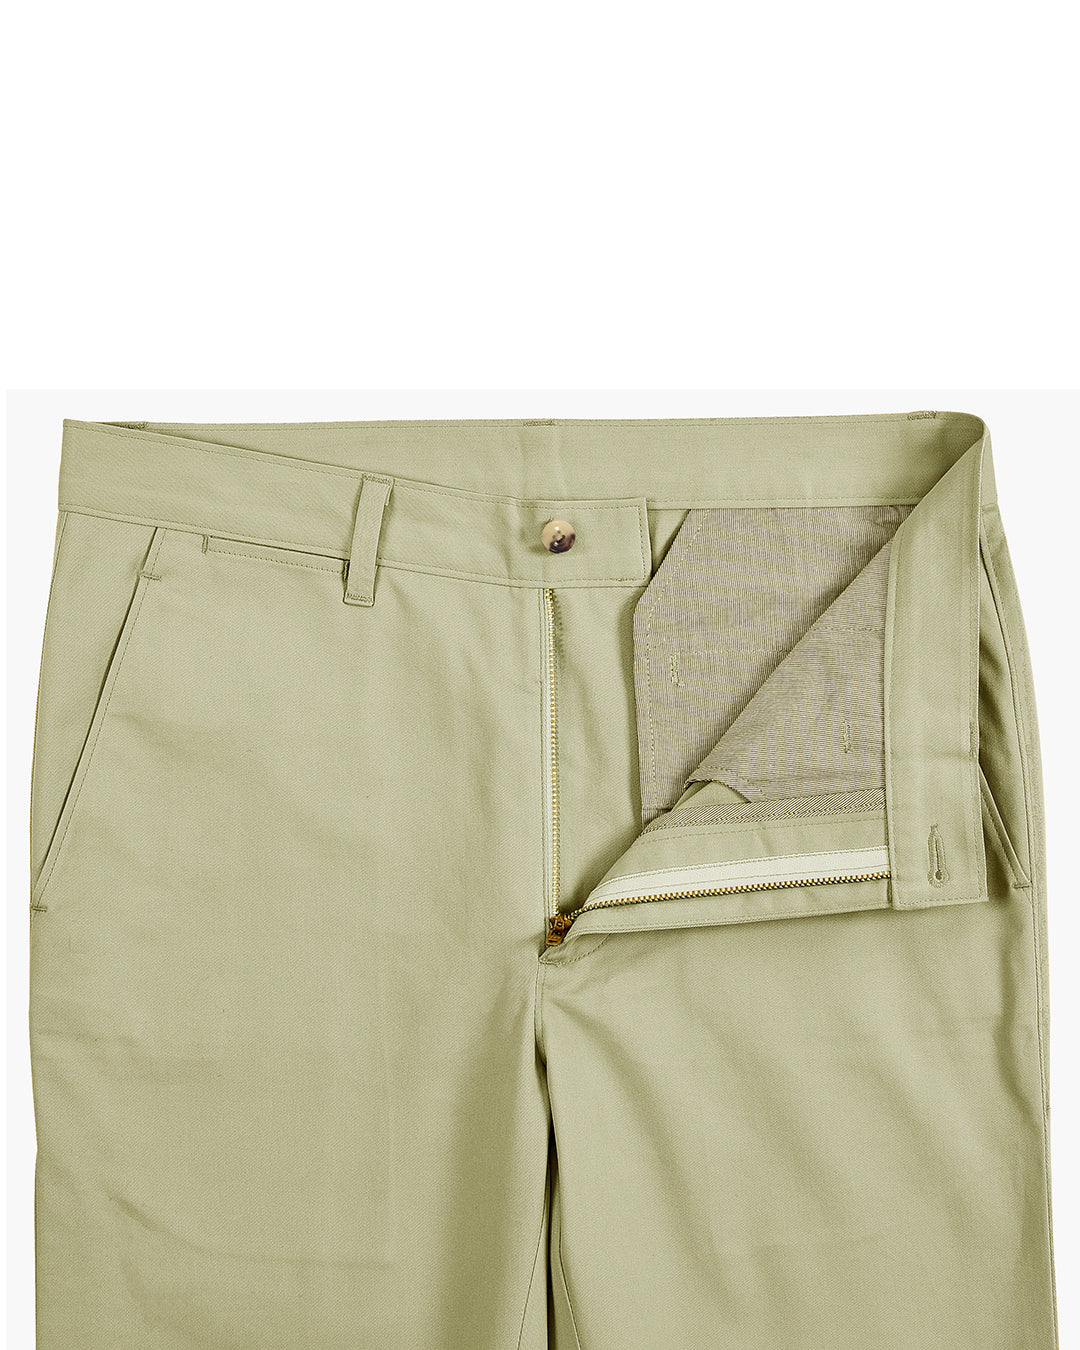 Open front view of custom Genoa Chino pants for men by Luxire in pale lime